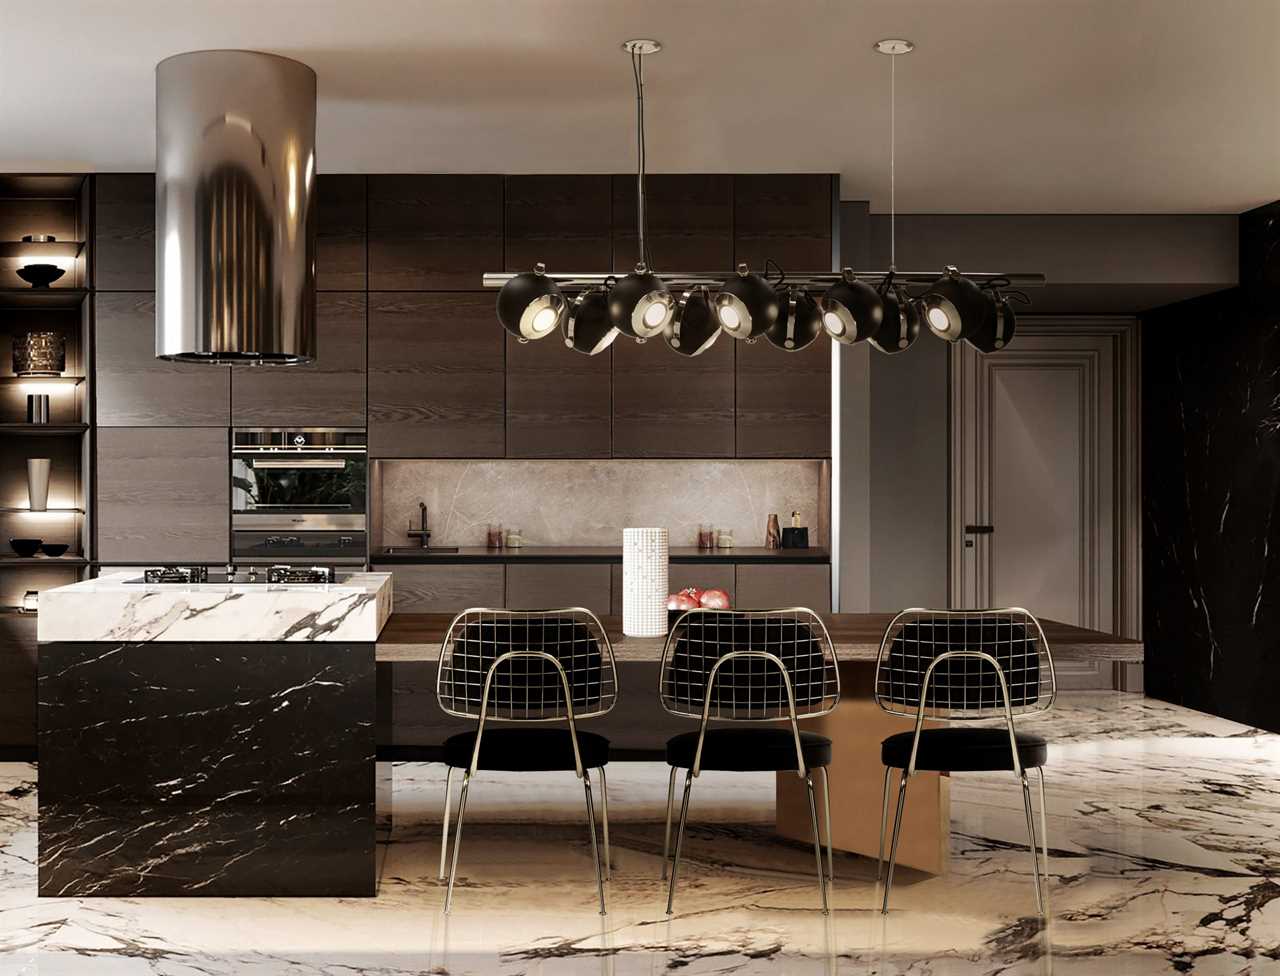 New Kitchen Design Trends For Modern Homes in 2023